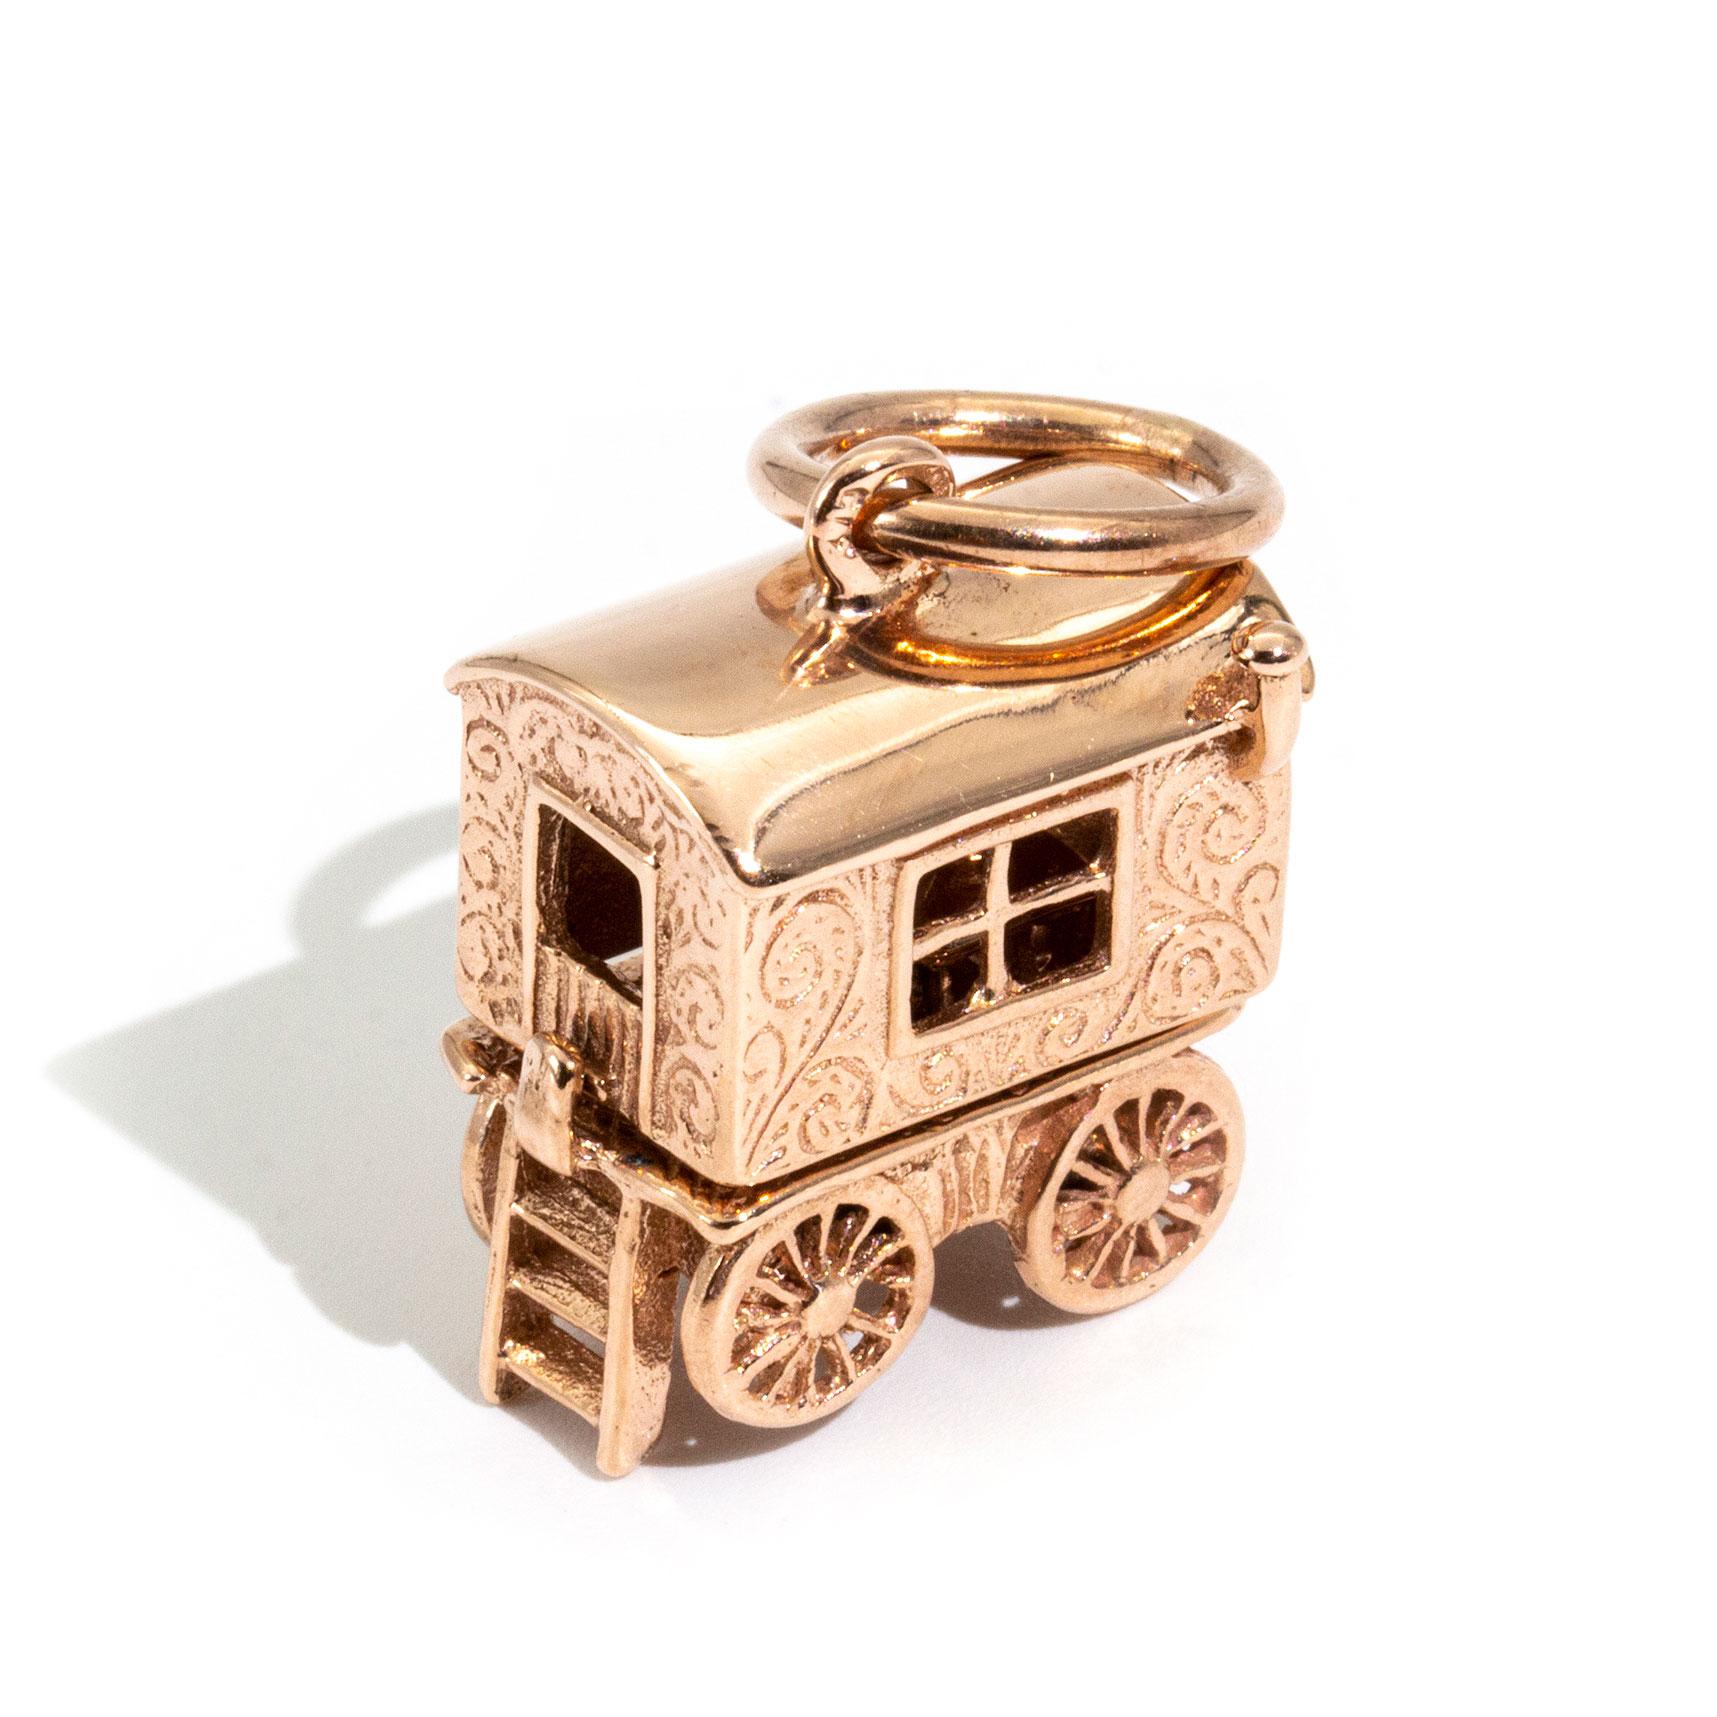 Modern 9 Carat Rose Gold Gypsy Carriage Vintage Charm or Pendant